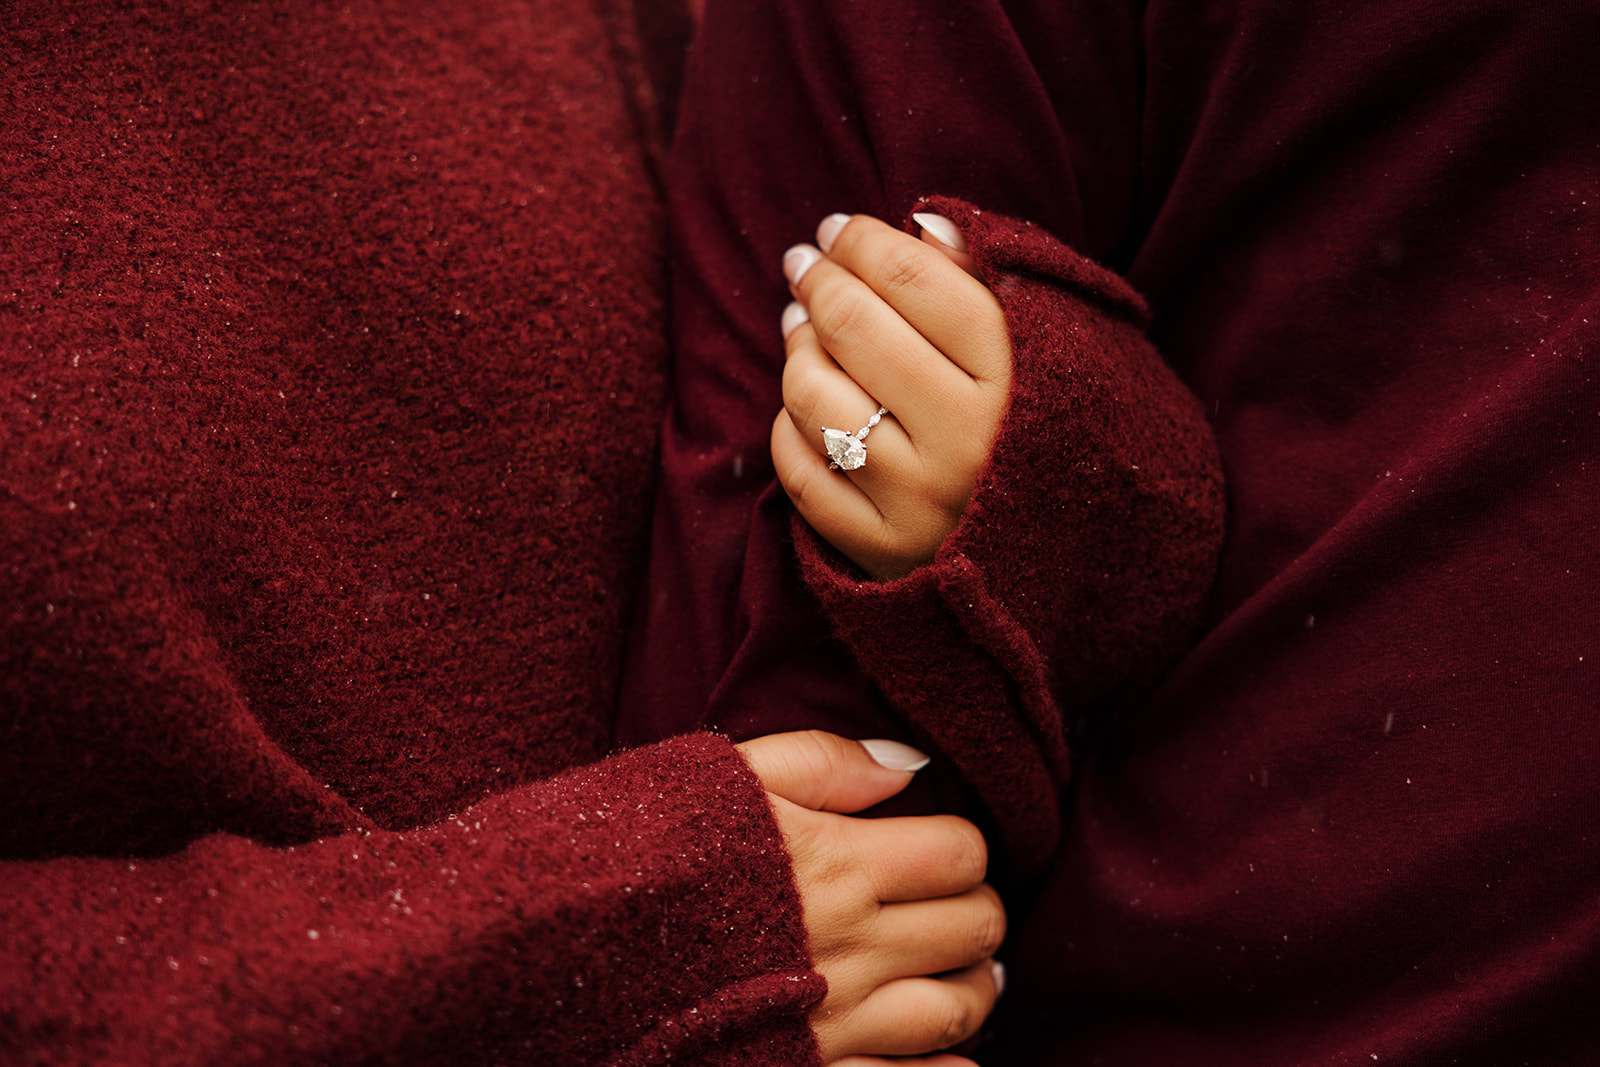 A close-up photo of a couple linking arms with a focus on the woman's engagement ring.